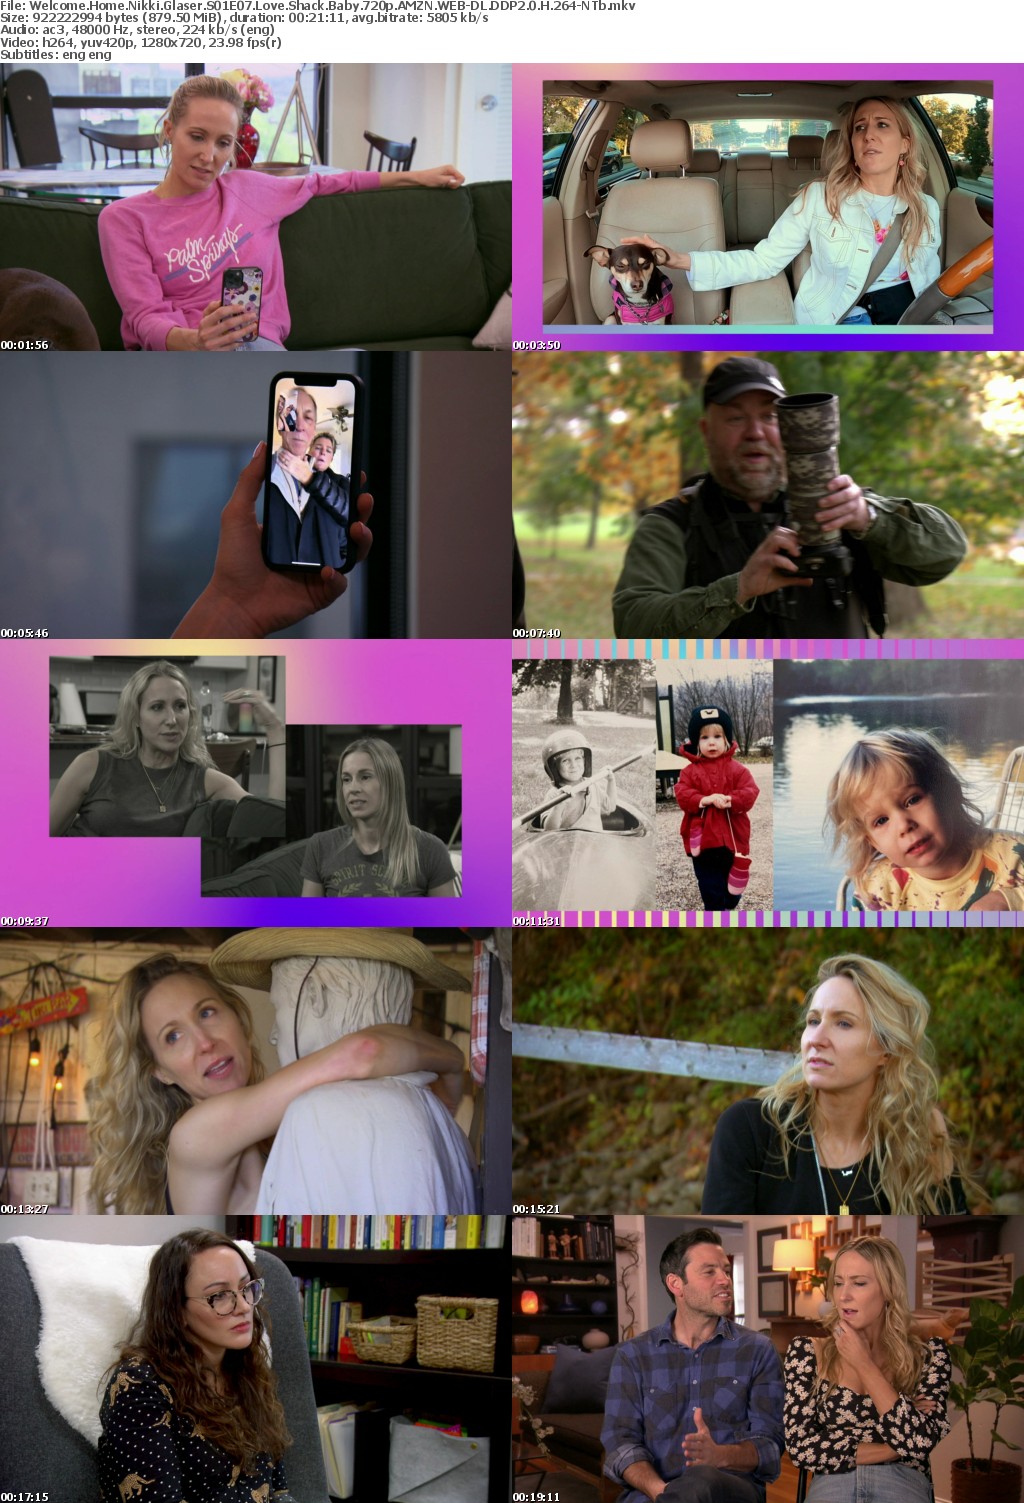 Welcome Home Nikki Glaser S01E07 Love Shack Baby 720p AMZN WEB-DL DDP2 0 H 264-NTb